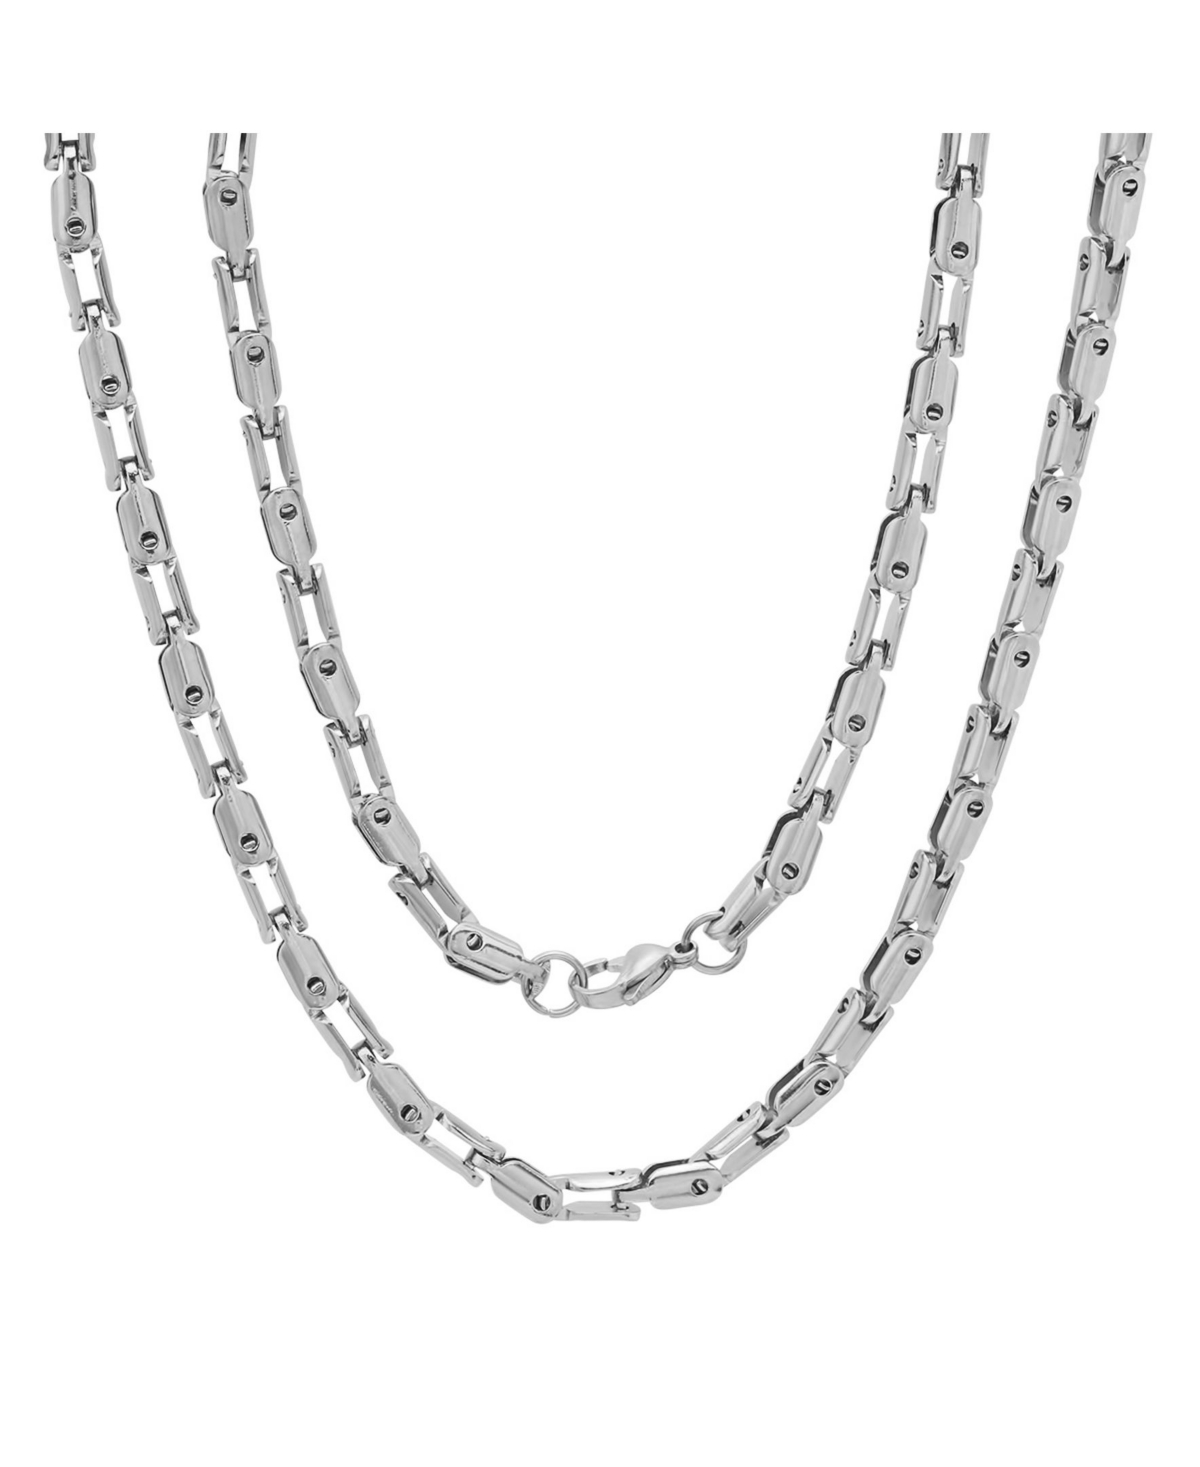 Men's Stainless Steel 24" Rounded Bicycle Link Chain Necklaces - Silver